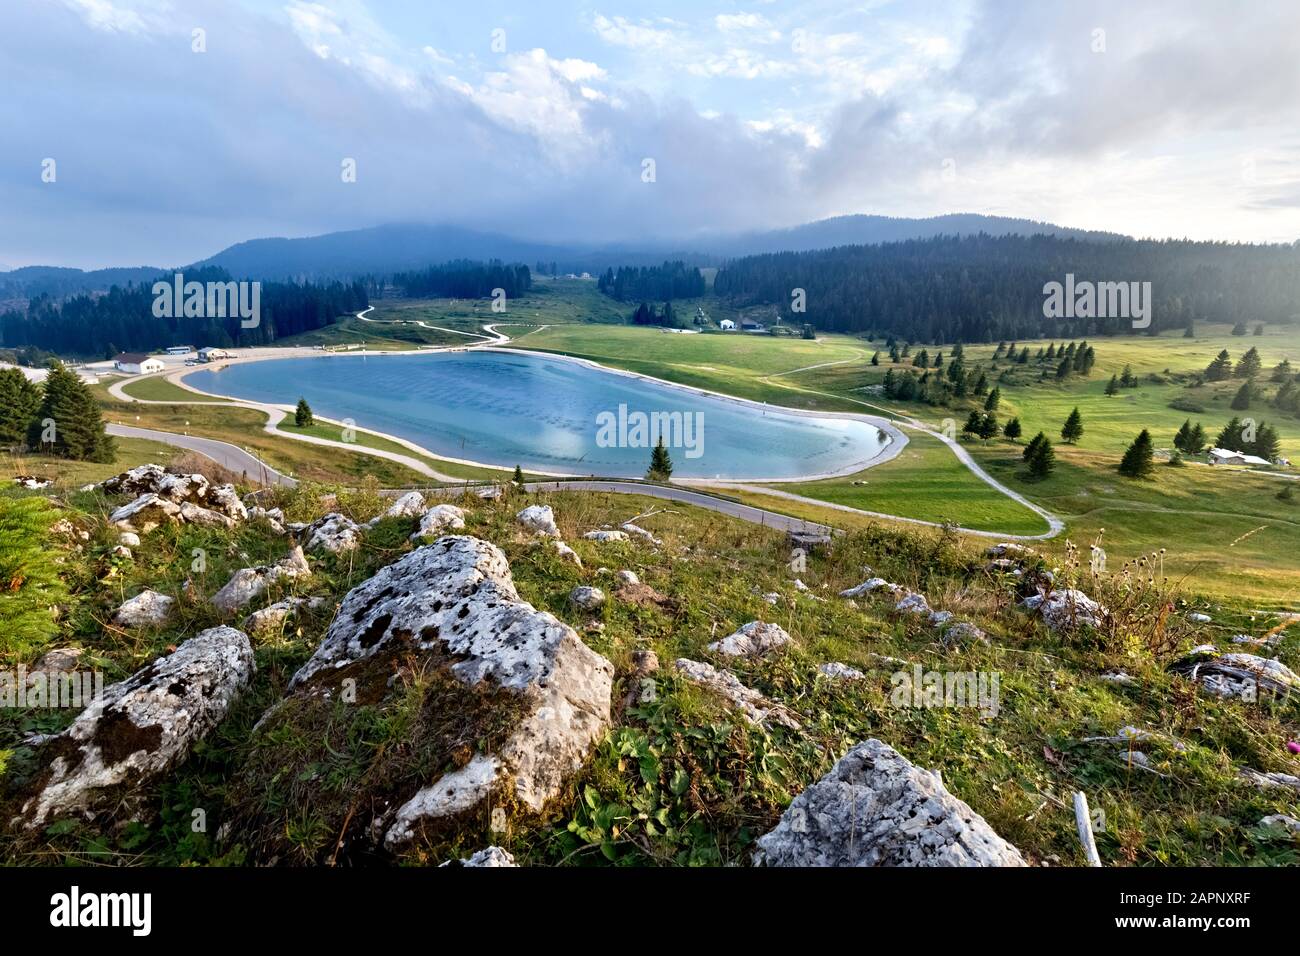 The lake and meadows at the Coe pass: Base Tuono museum on the right, Mount Maggio in the background. Folgaria, Cimbra Alp, Trentino, Italy. Stock Photo